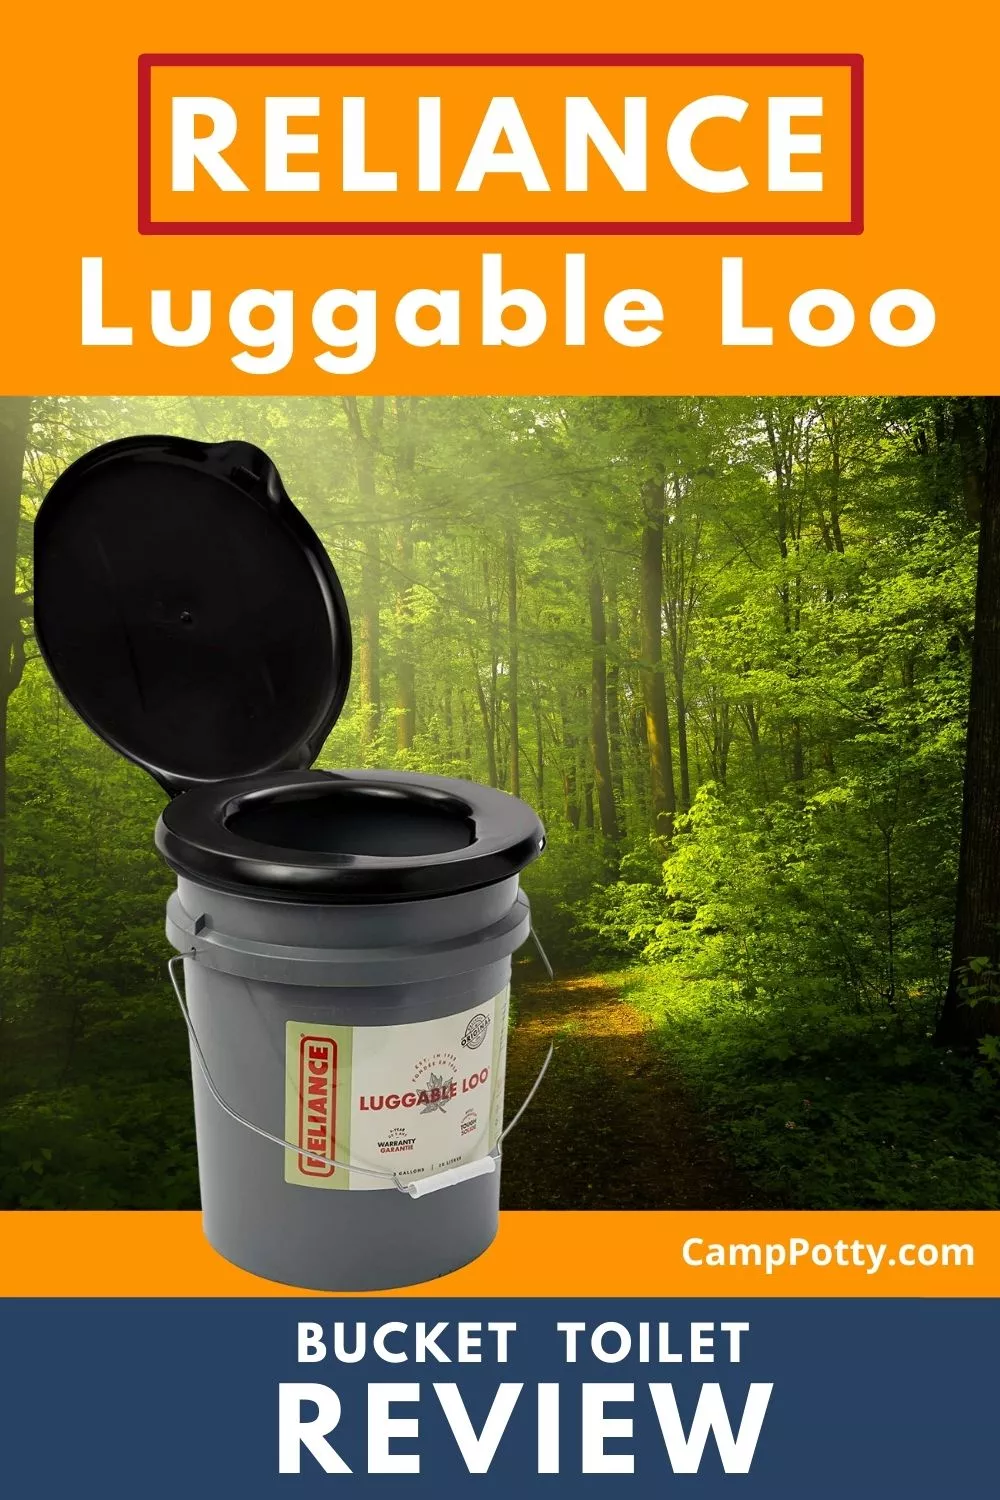 An in-depth review of Reliance Luggable Loo Review bucket Toilet. Incl. pros and cons, how it is use and who is it for.